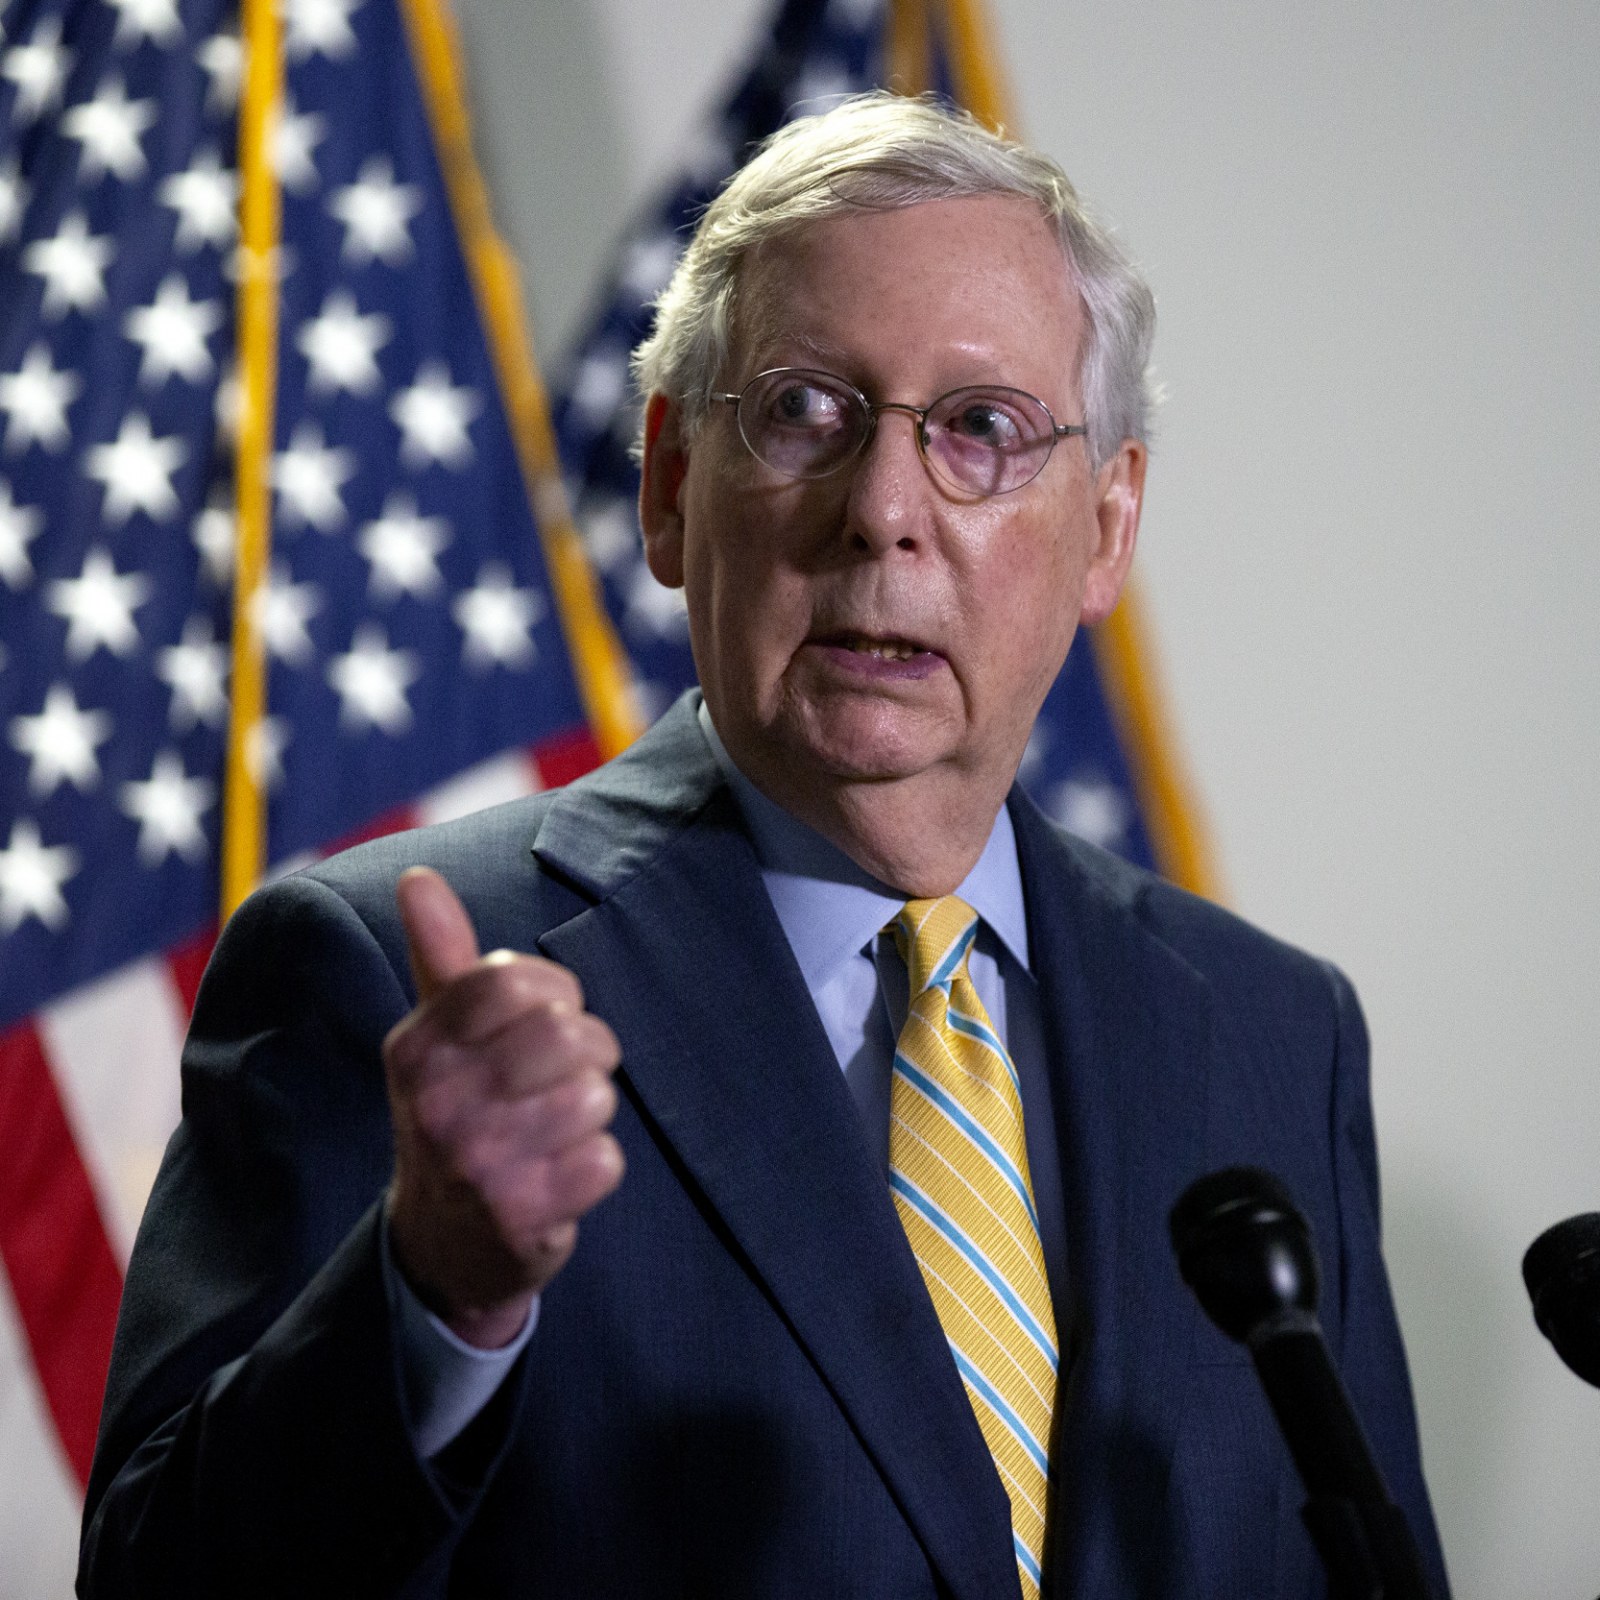 Mitch Mcconnell Approval Rating - Least-Popular US Senator